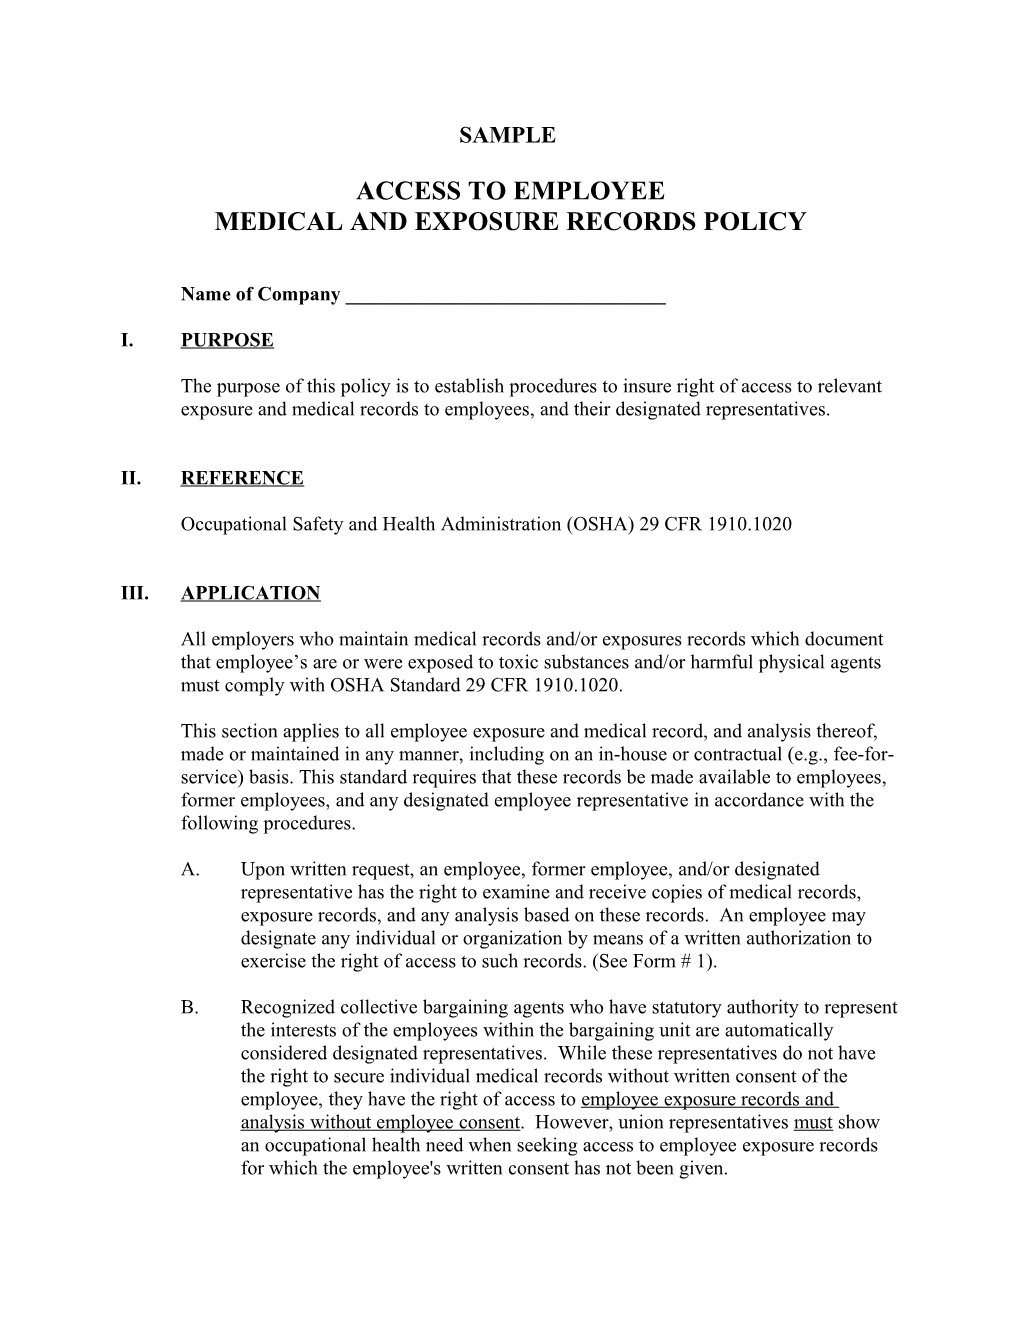 Medical and Exposure Records Policy